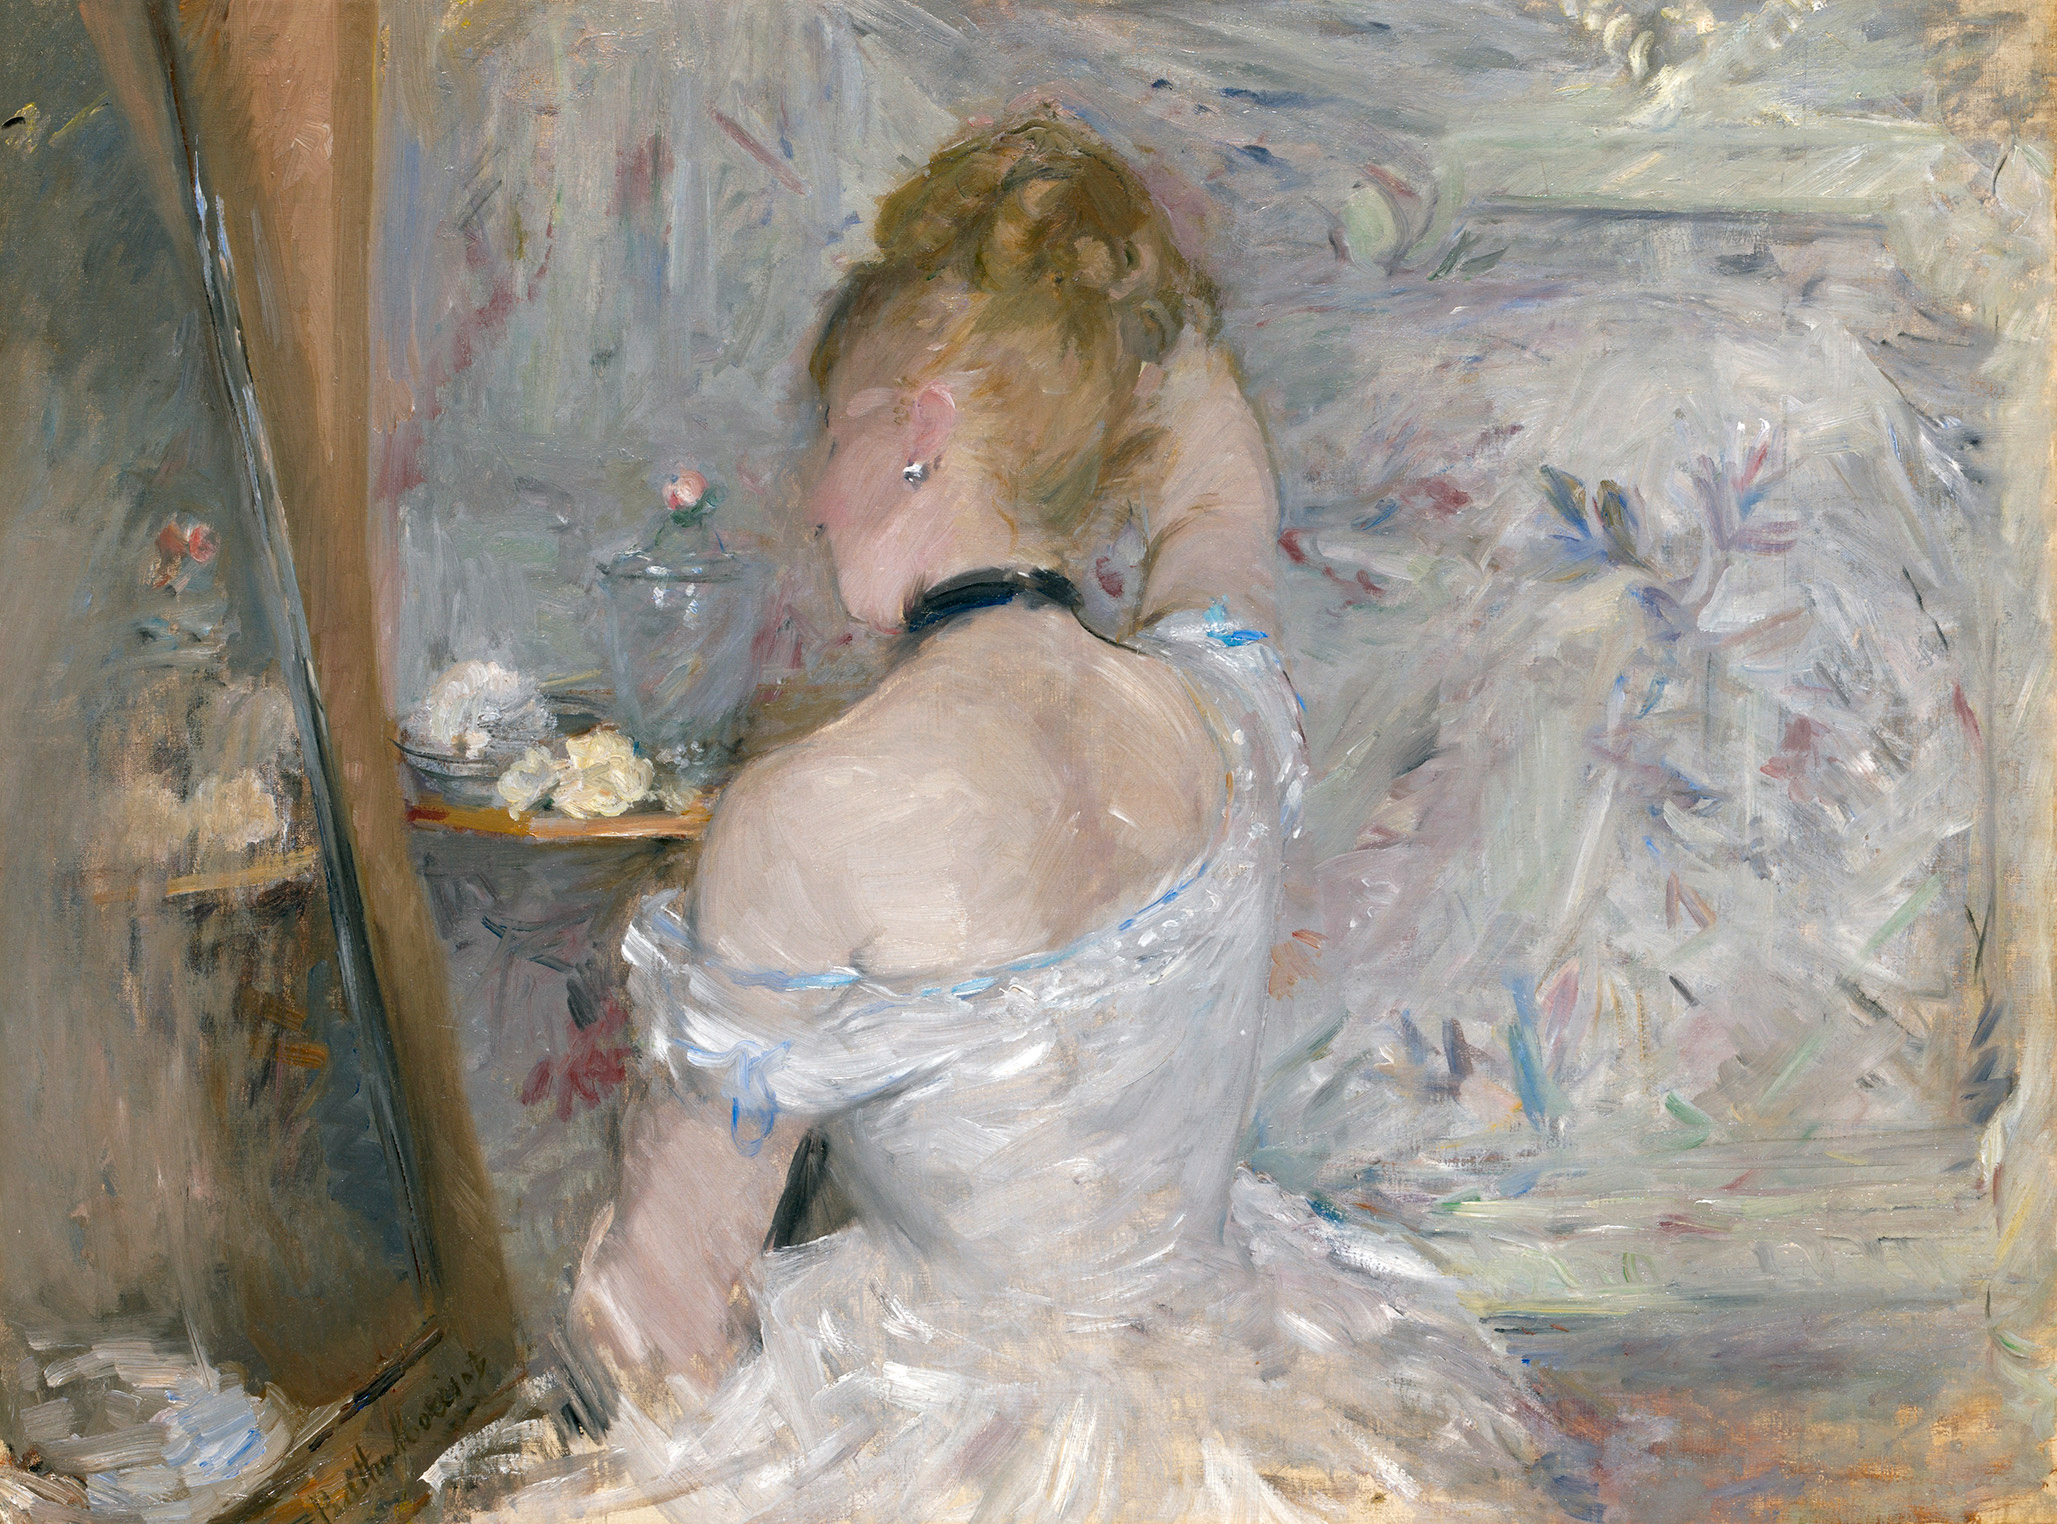 ‘Berthe Morisot, Woman Impressionist’ a Stunning Show | National Review